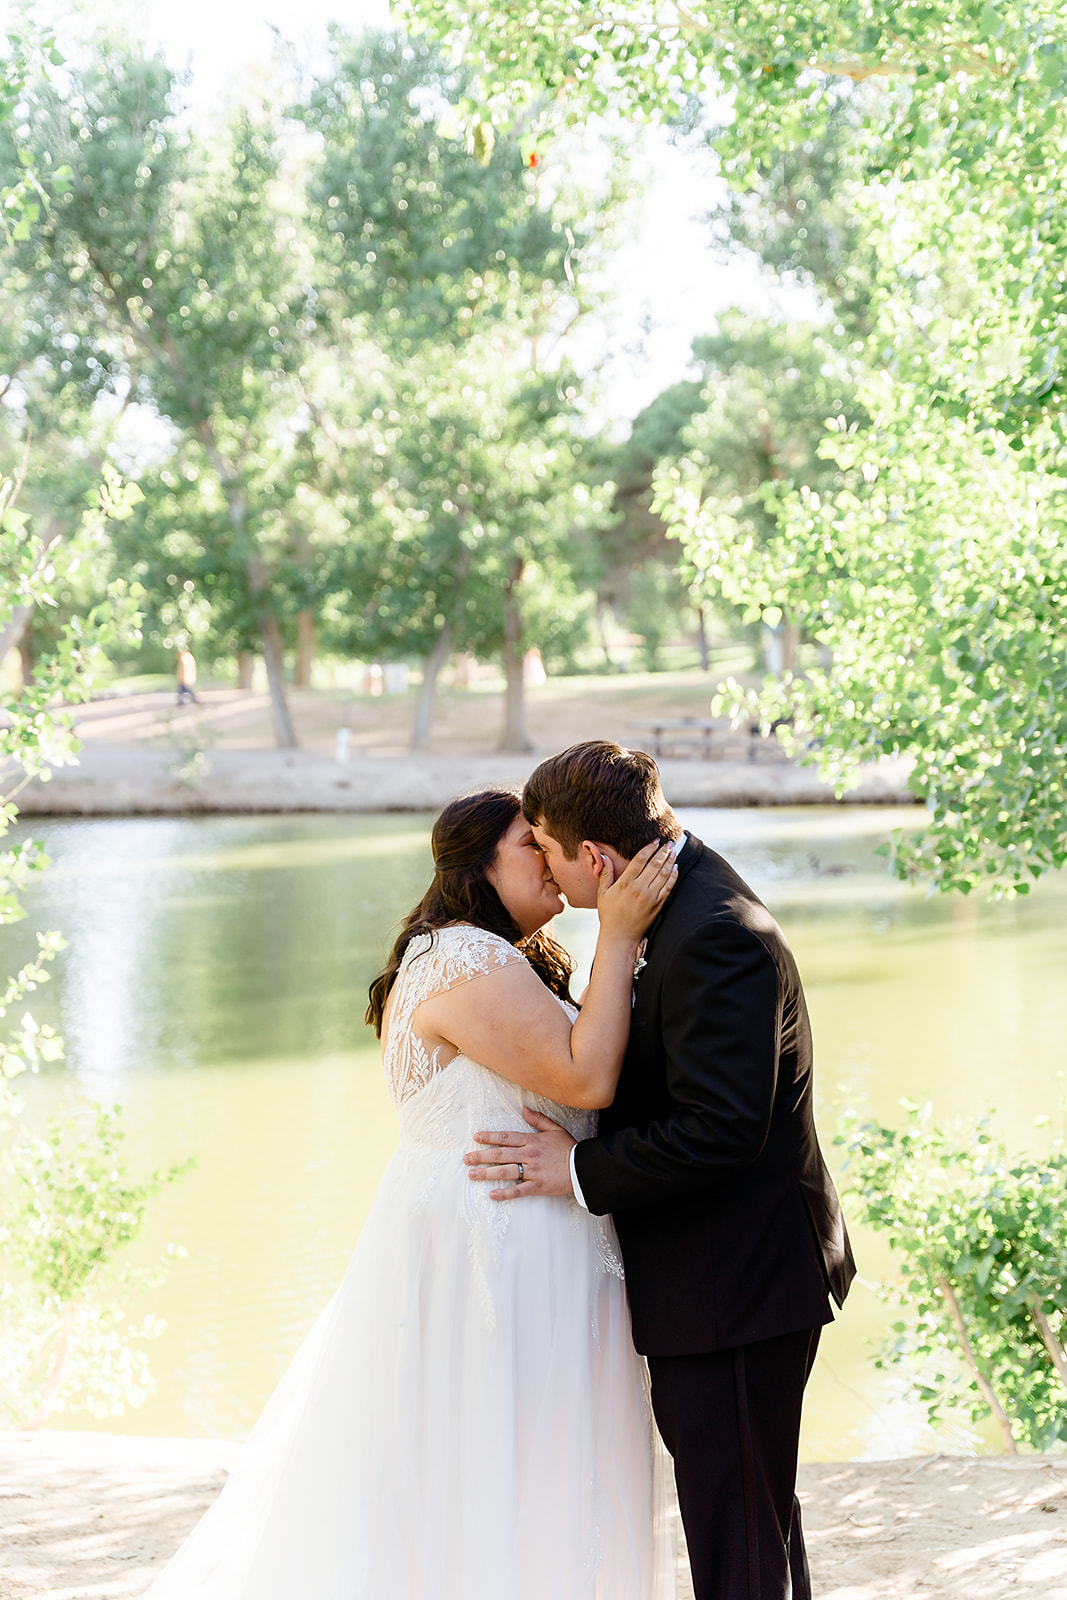 The Ultimate Tule Springs Wedding and Elopement Planning Guide. Couple sharing a kiss in front of lake during their elopement.